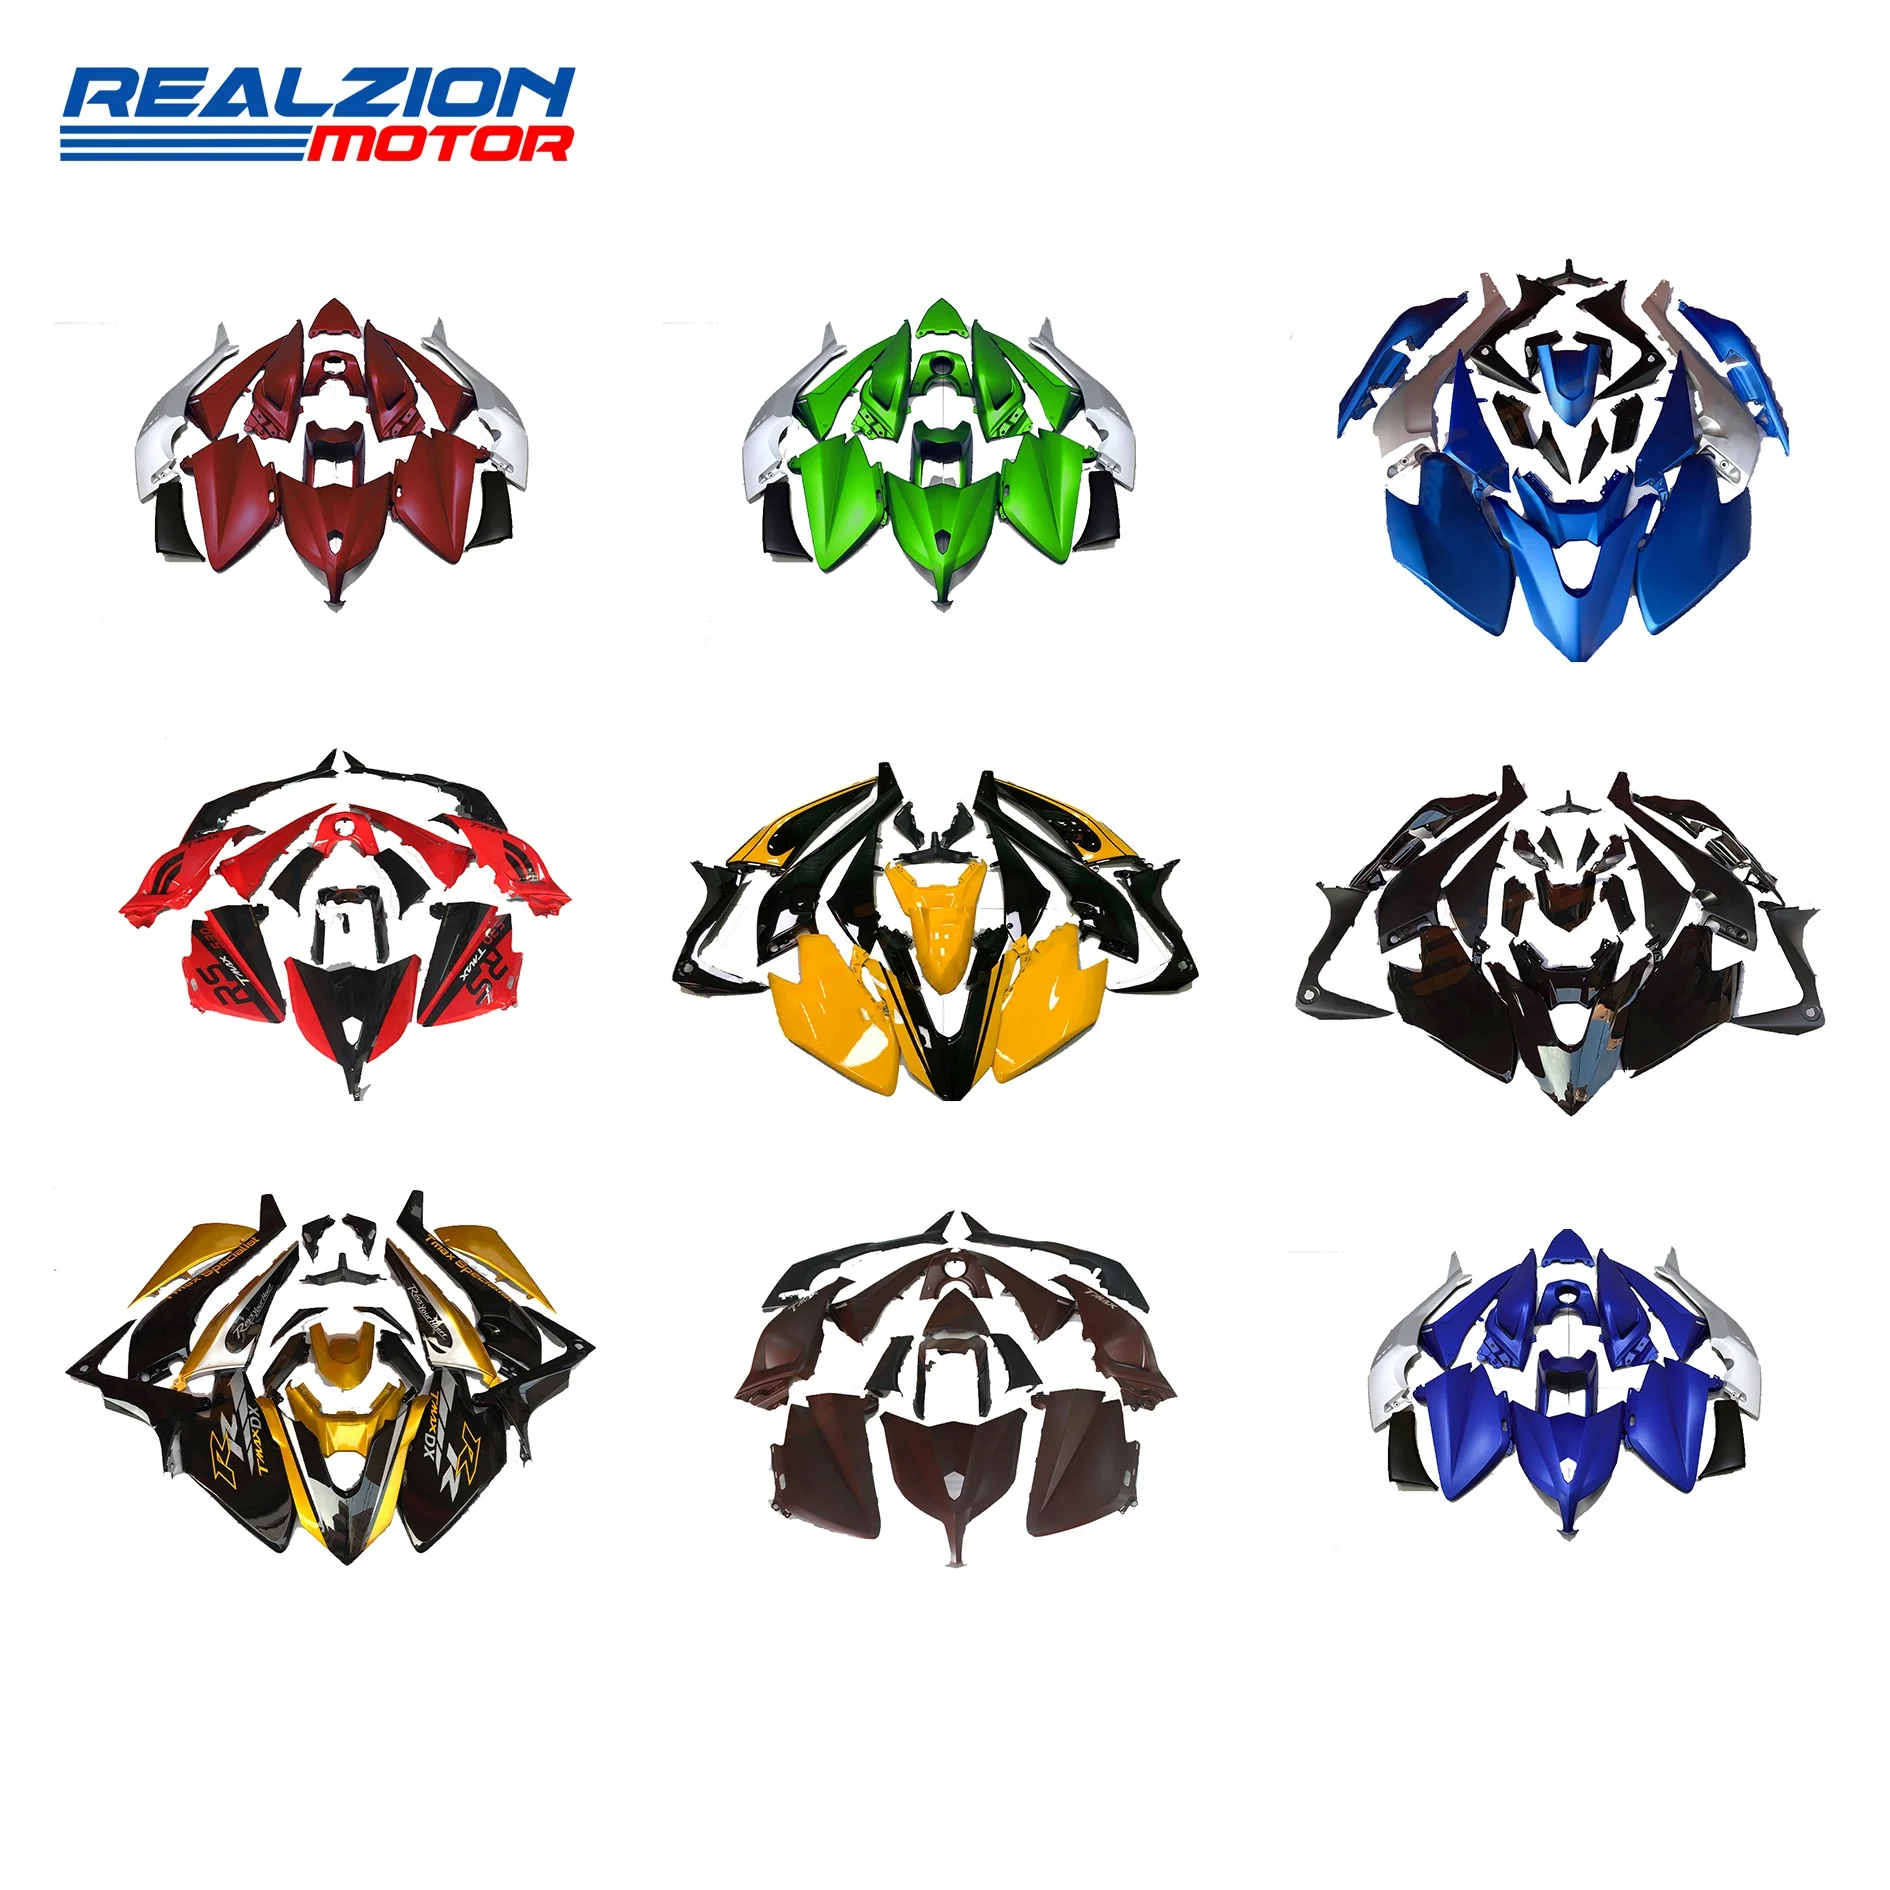 

REALZION Motorcycle Parts Scooter Customized Fairings Kit ABS Plastic Fairing For YAMAHA TMAX 500 530 TMAX500 TMAX530 2001-2019, Abs plastic for different colors